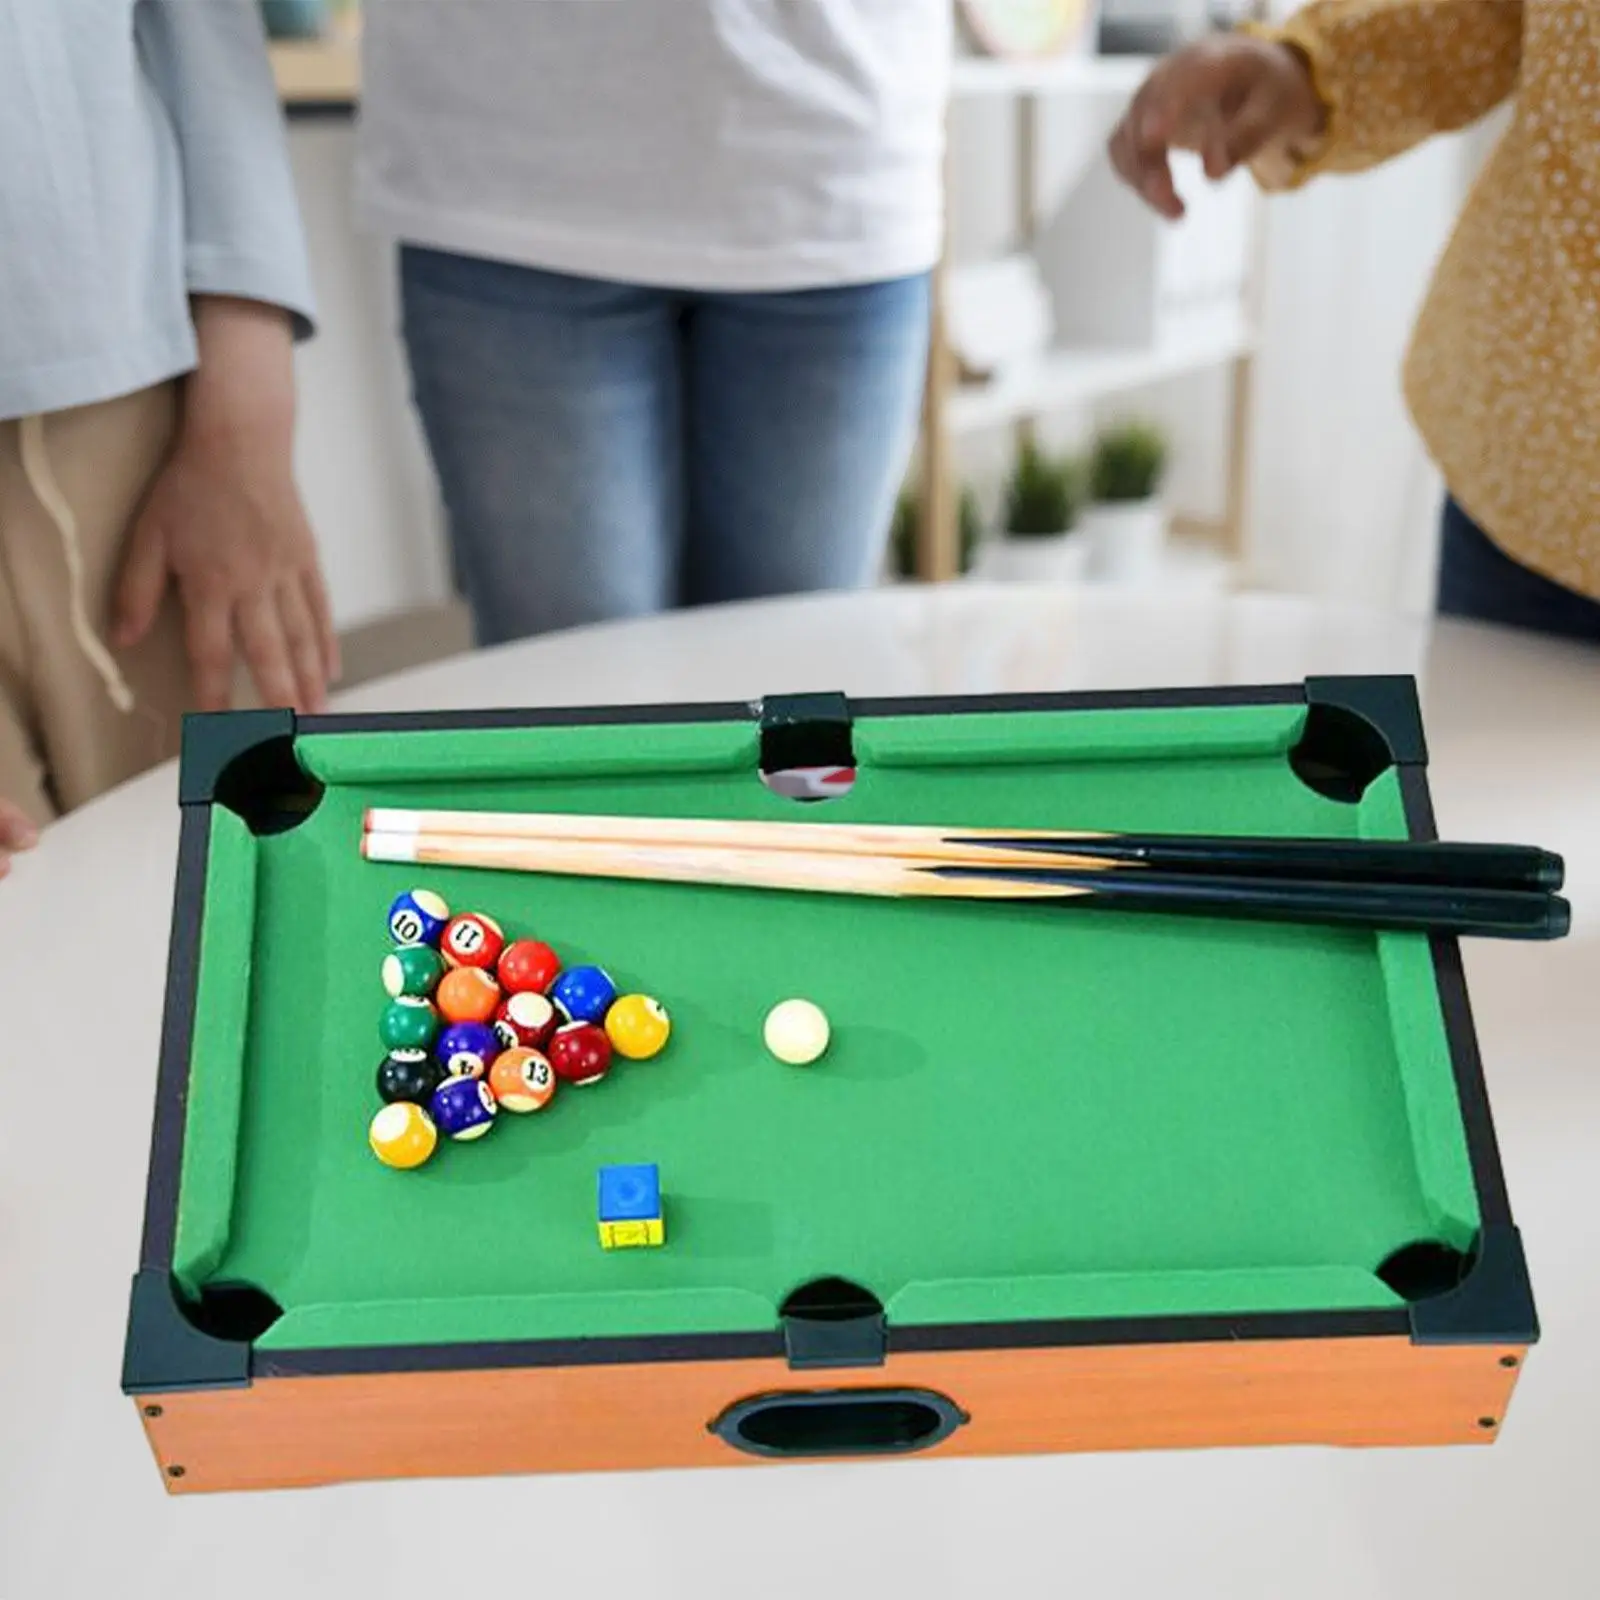 Mini Pool Table with Game Balls Portable Snooker for Playhouse Office Desk